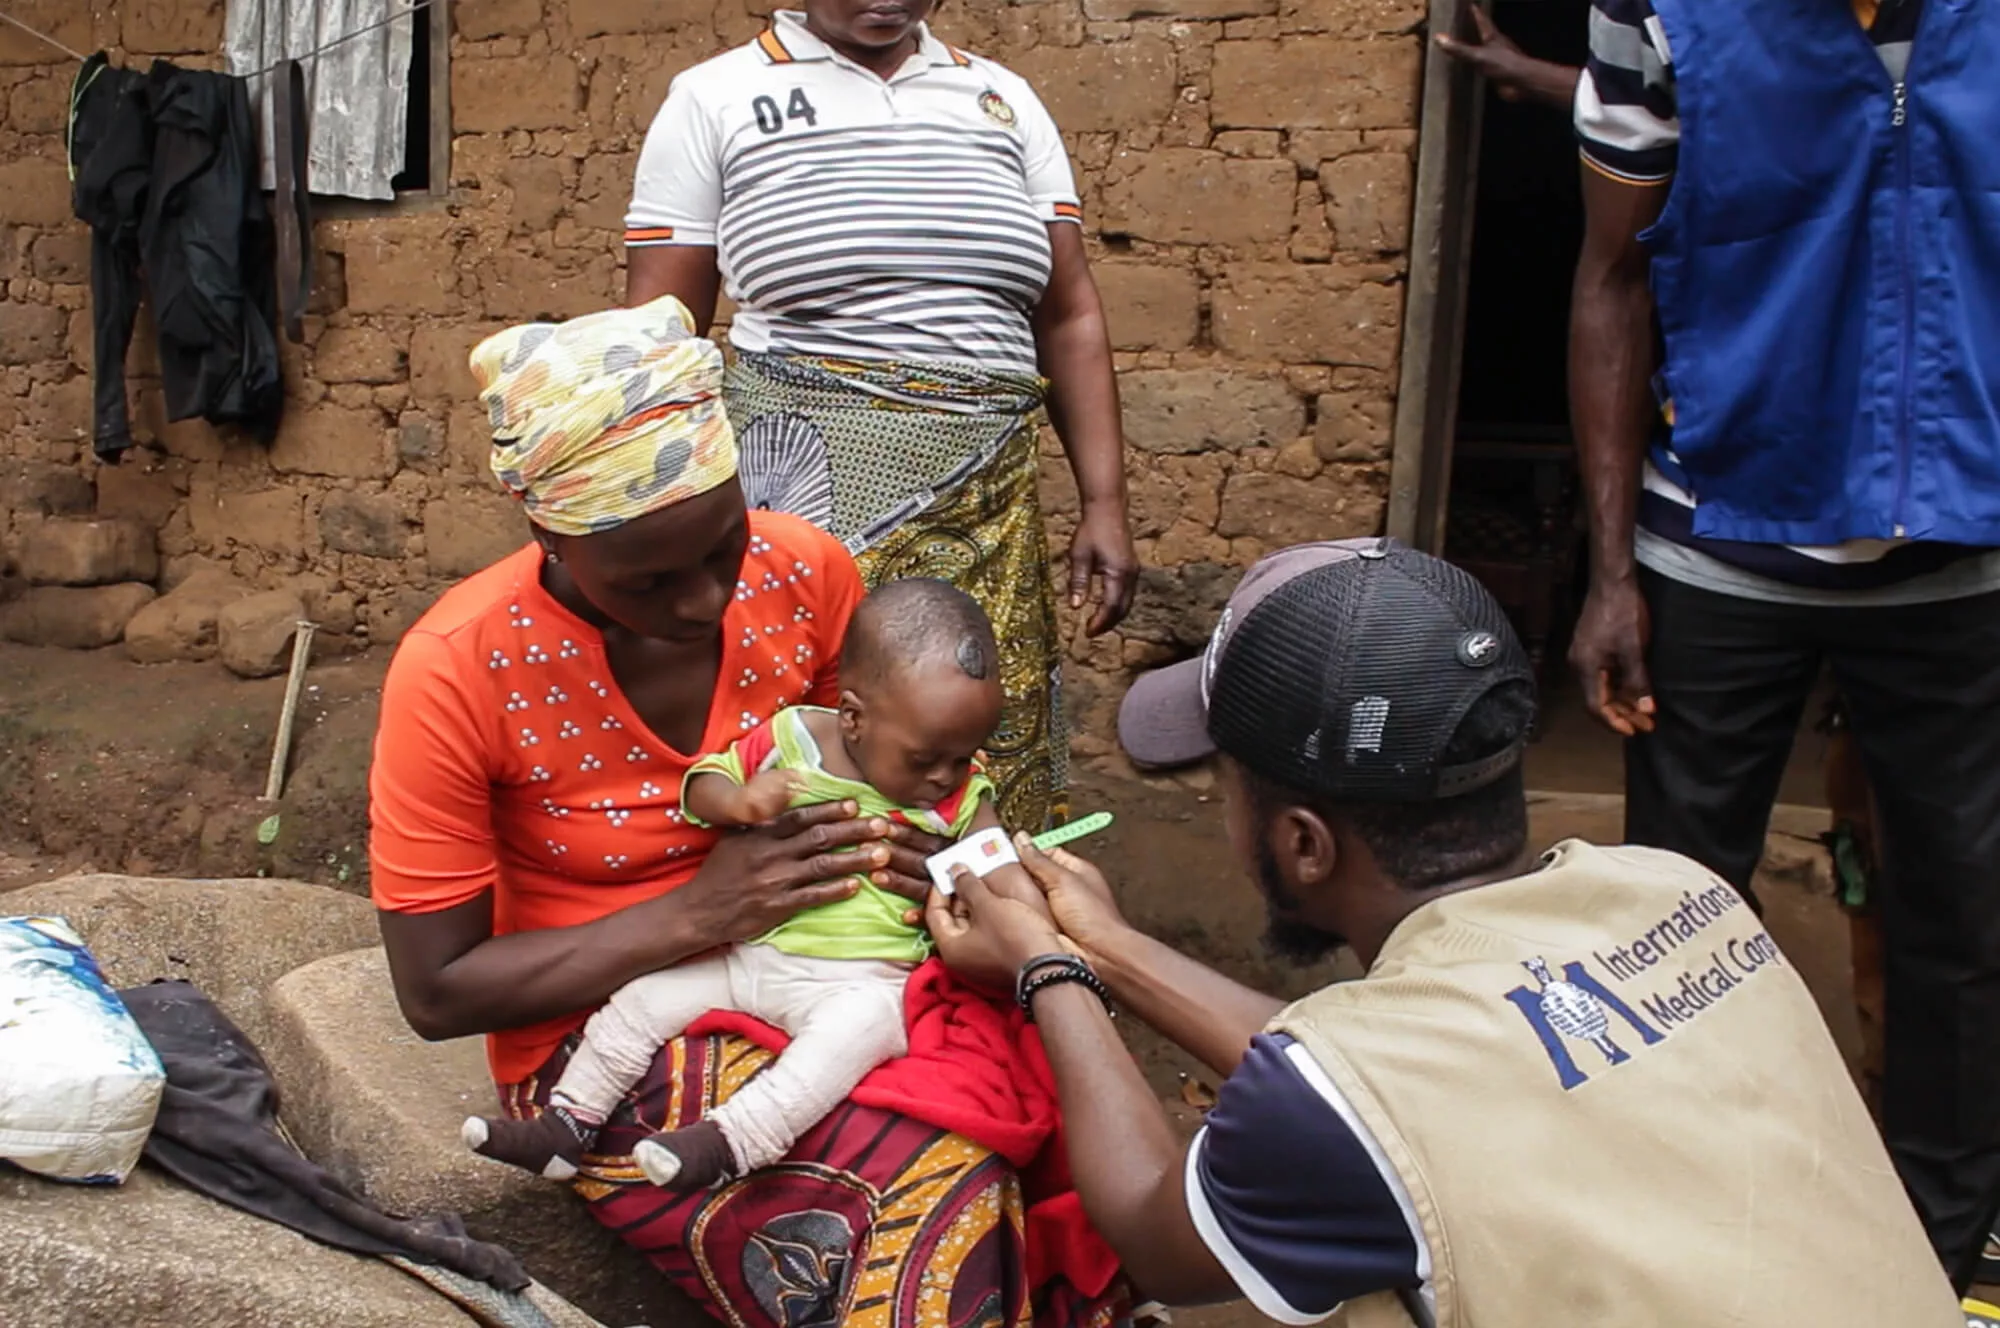 A staff member conducts a home visit to check for signs of malnutrition.